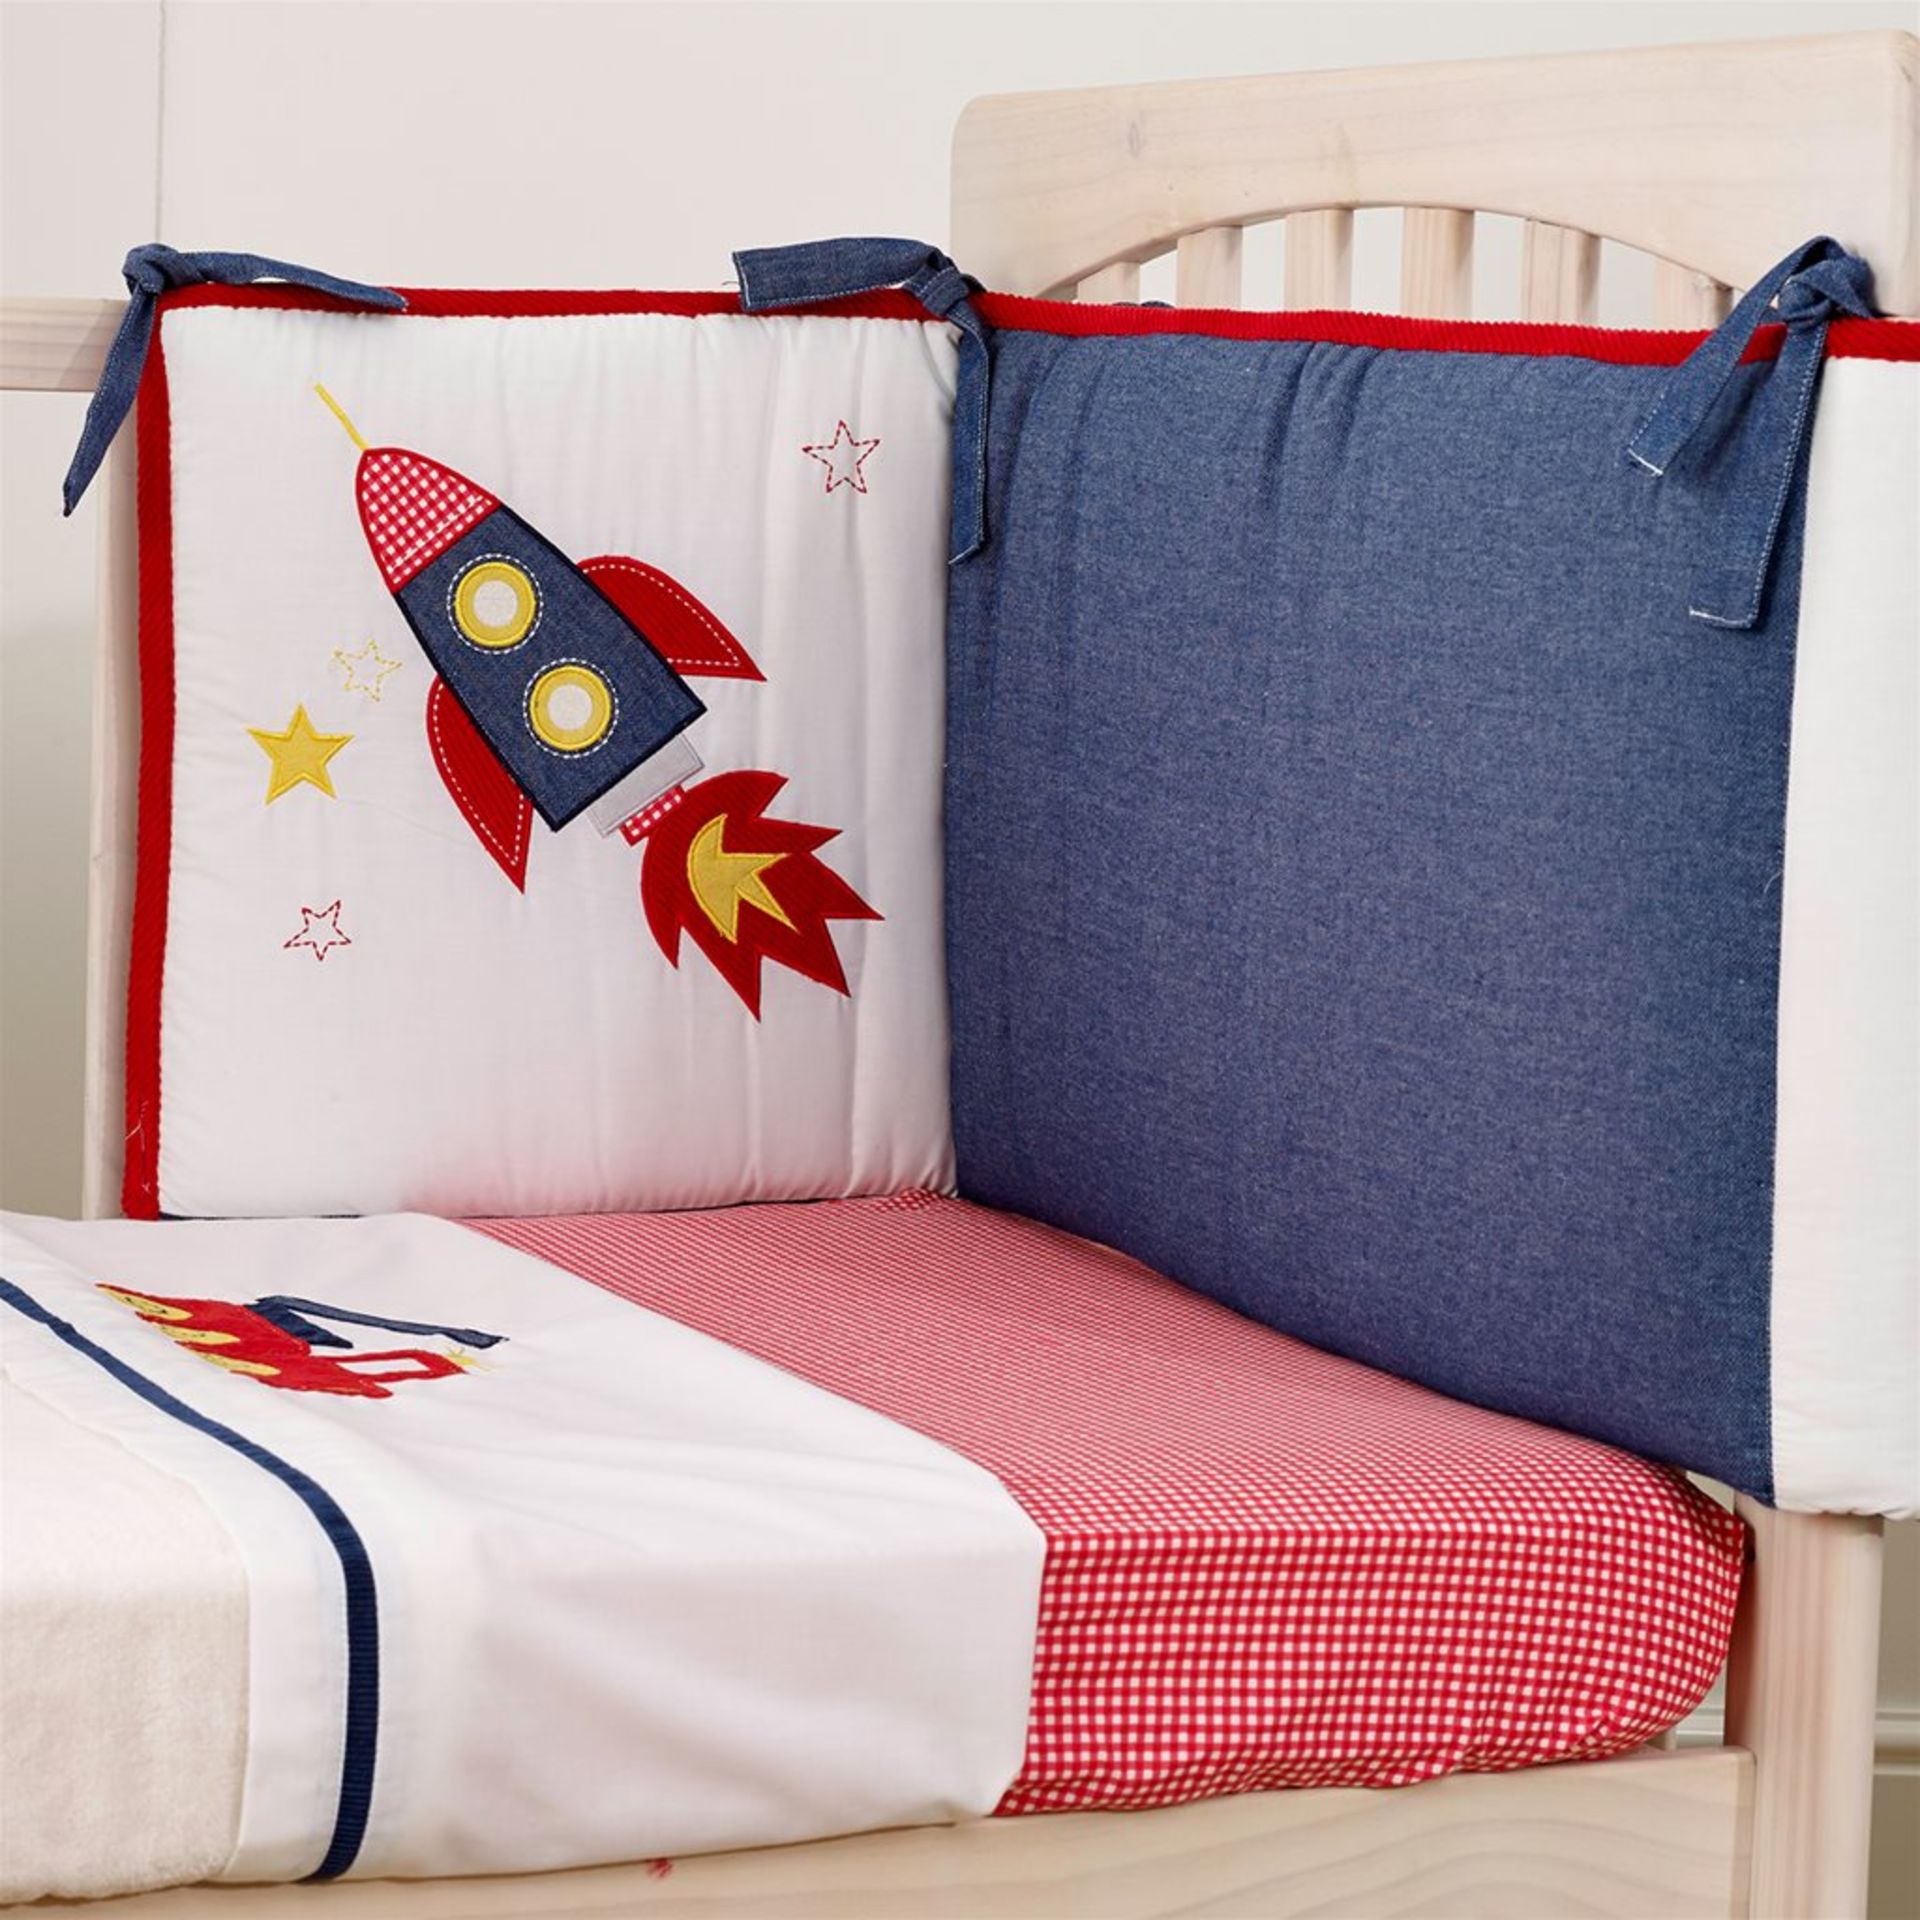 50 sets Fetch the Engine Boy's Cotbed Bedding Set (5 piece) - Image 2 of 4